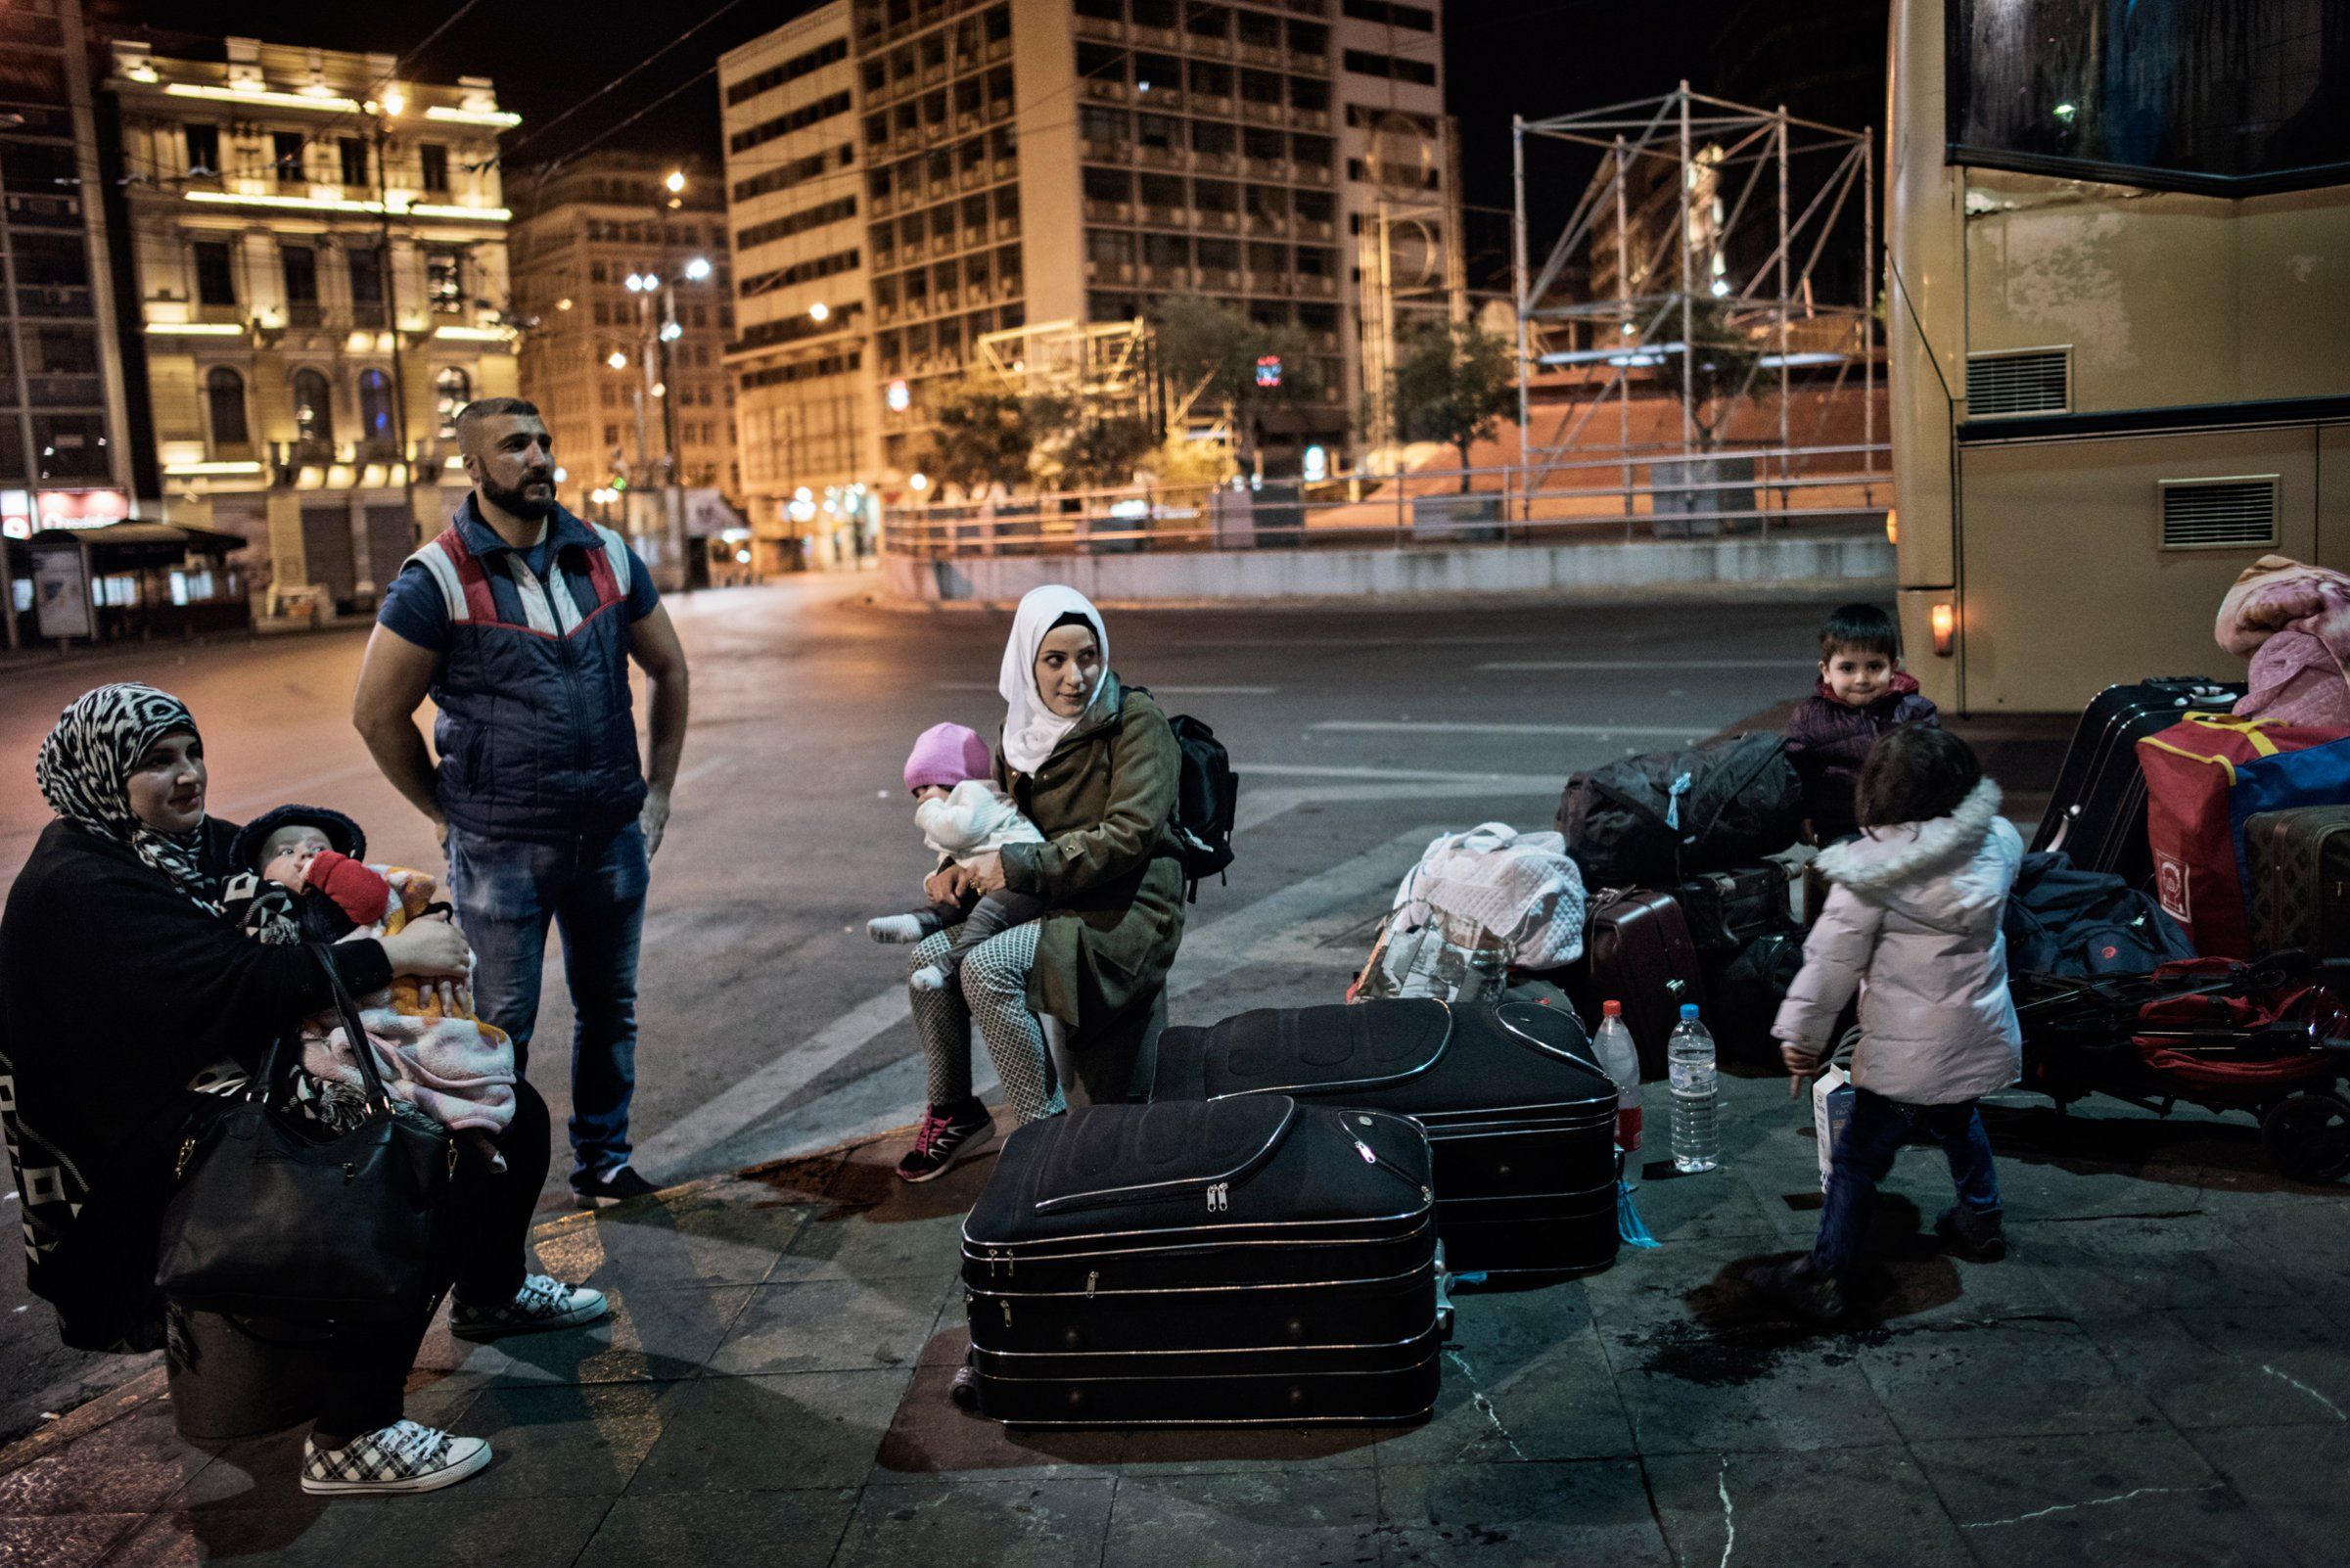 Syrian refugee Taimaa Abzali and her husband Muhanned Abzali, and their six month old daughter, Heln, and son Wael, wait in Athen's Ommonia square for transfer to the airport alongside Muhanned's brother Mufeed, his wife, Iman, and their two children, from Athens to Estonia for relocation. Image by Lynsey Addario. Greece, 2017. 